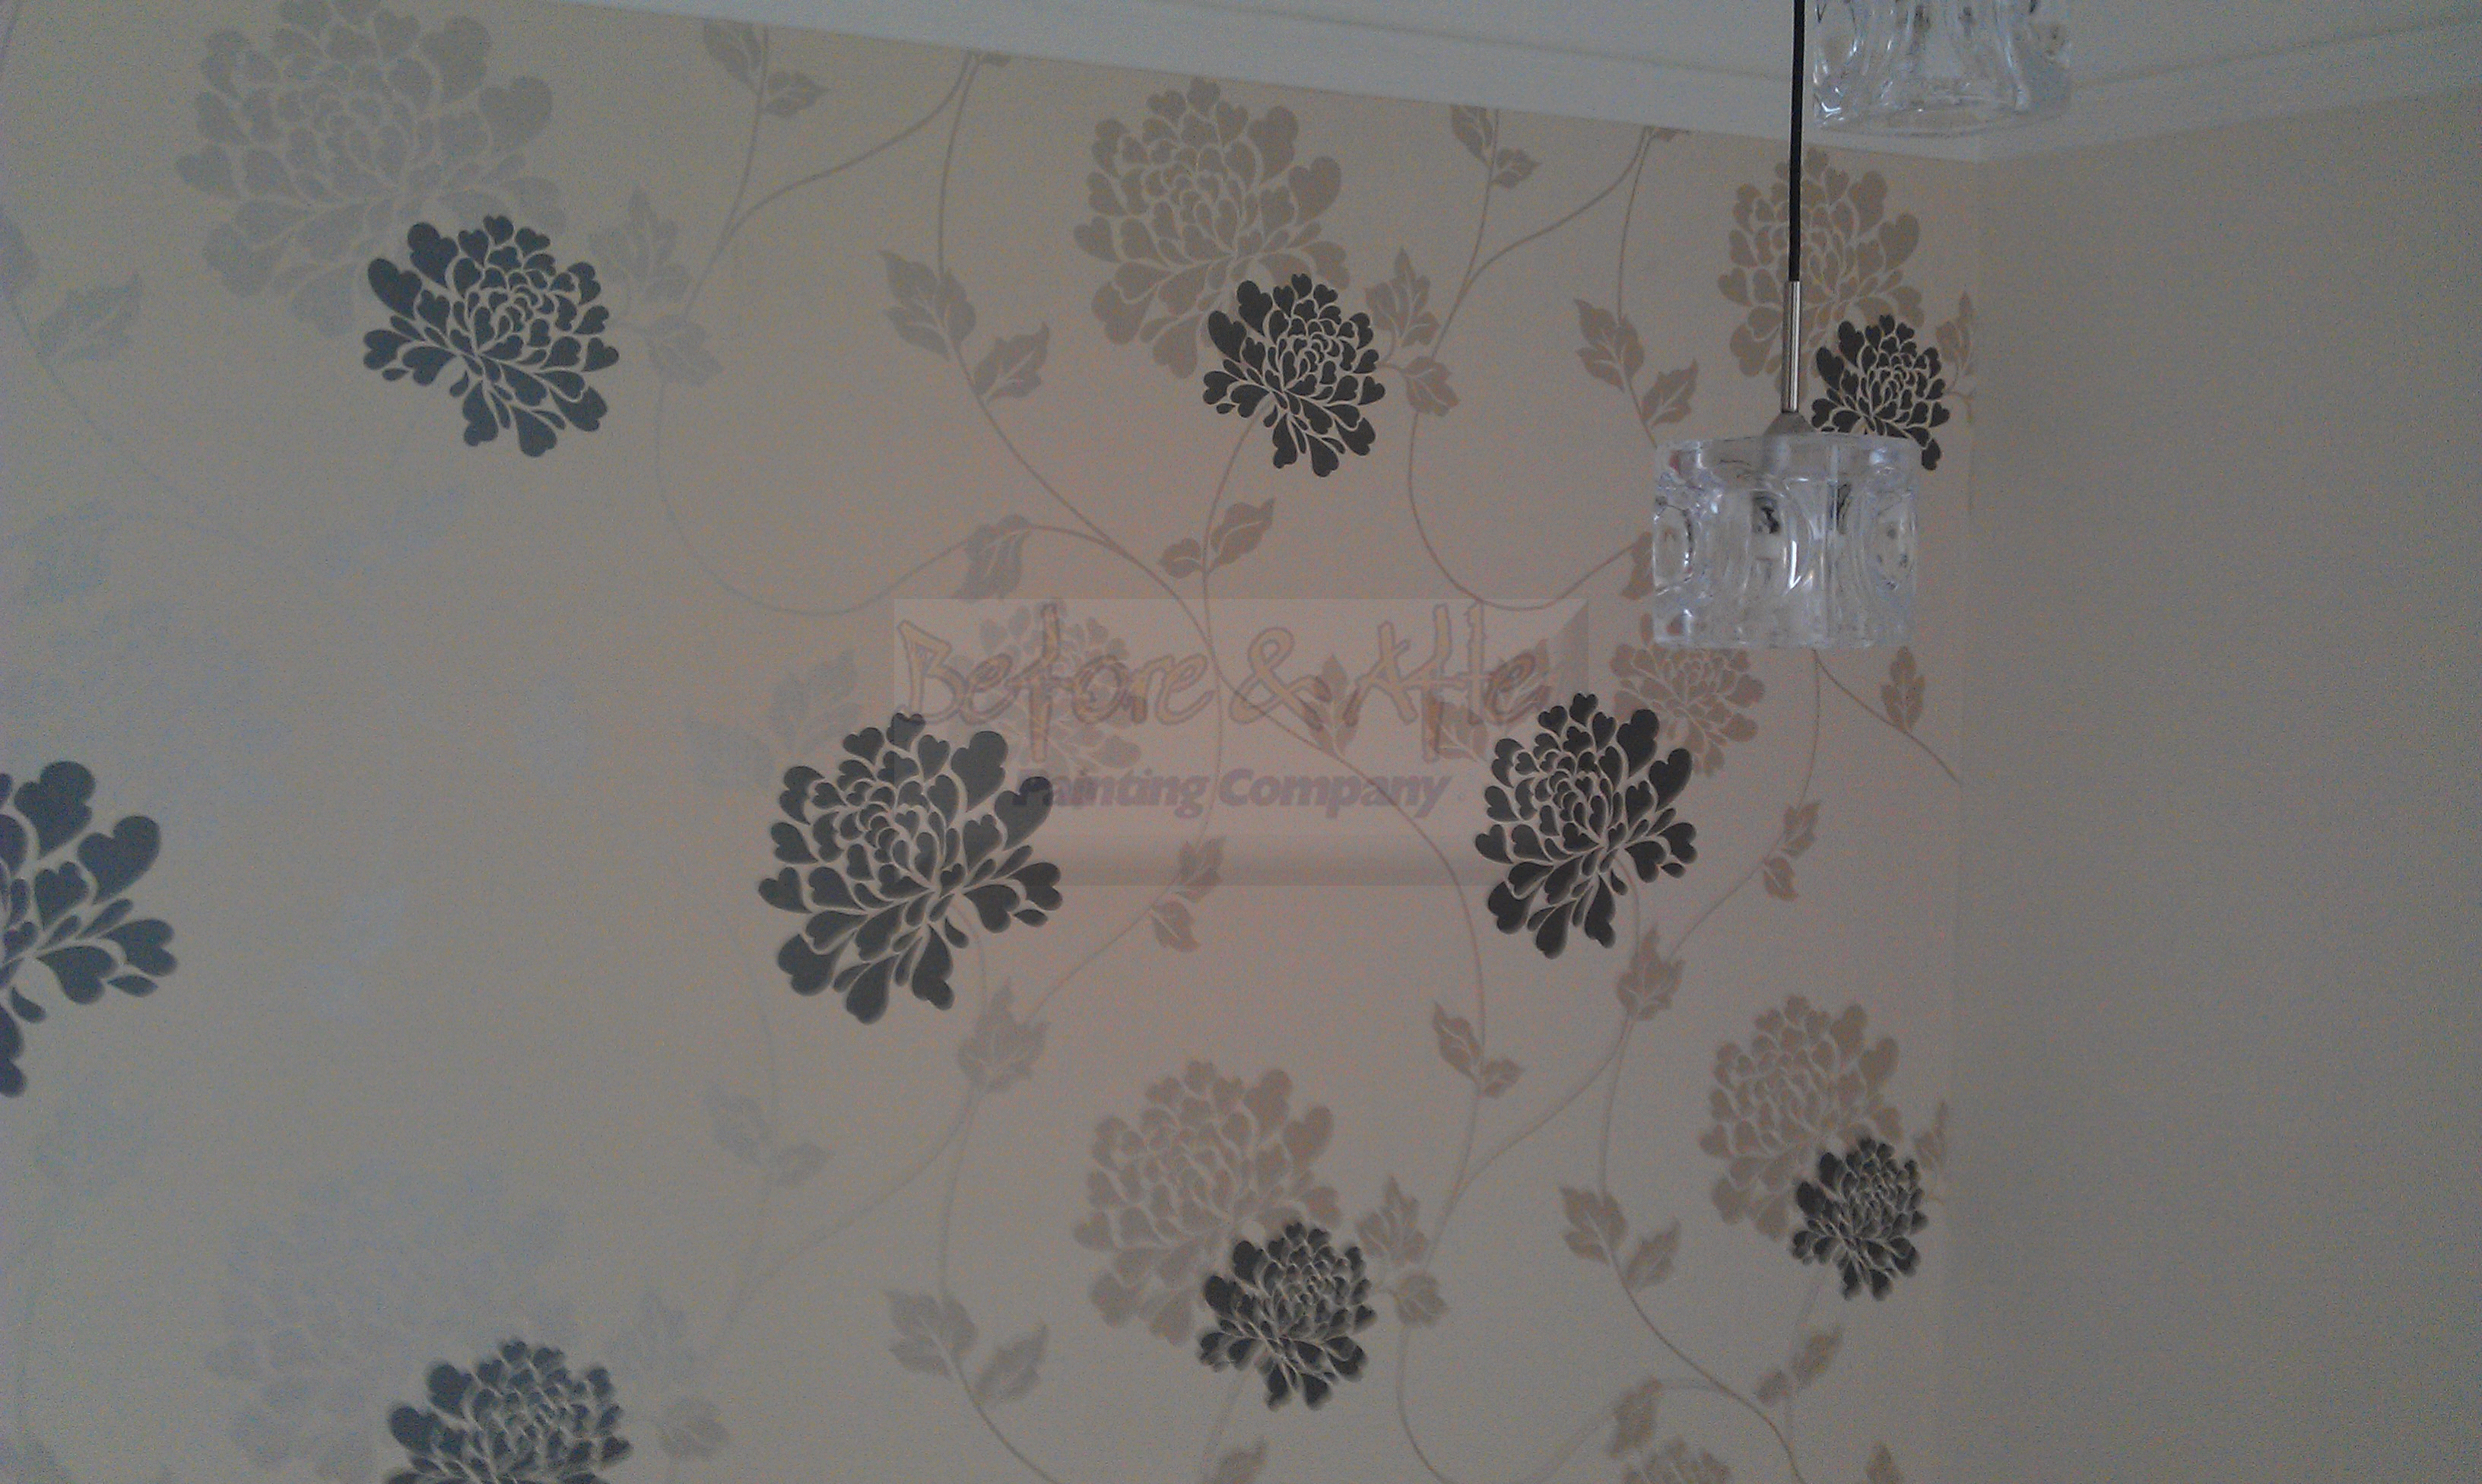 Laura Ashley wallcovering here. Quite a nice paper to hang.